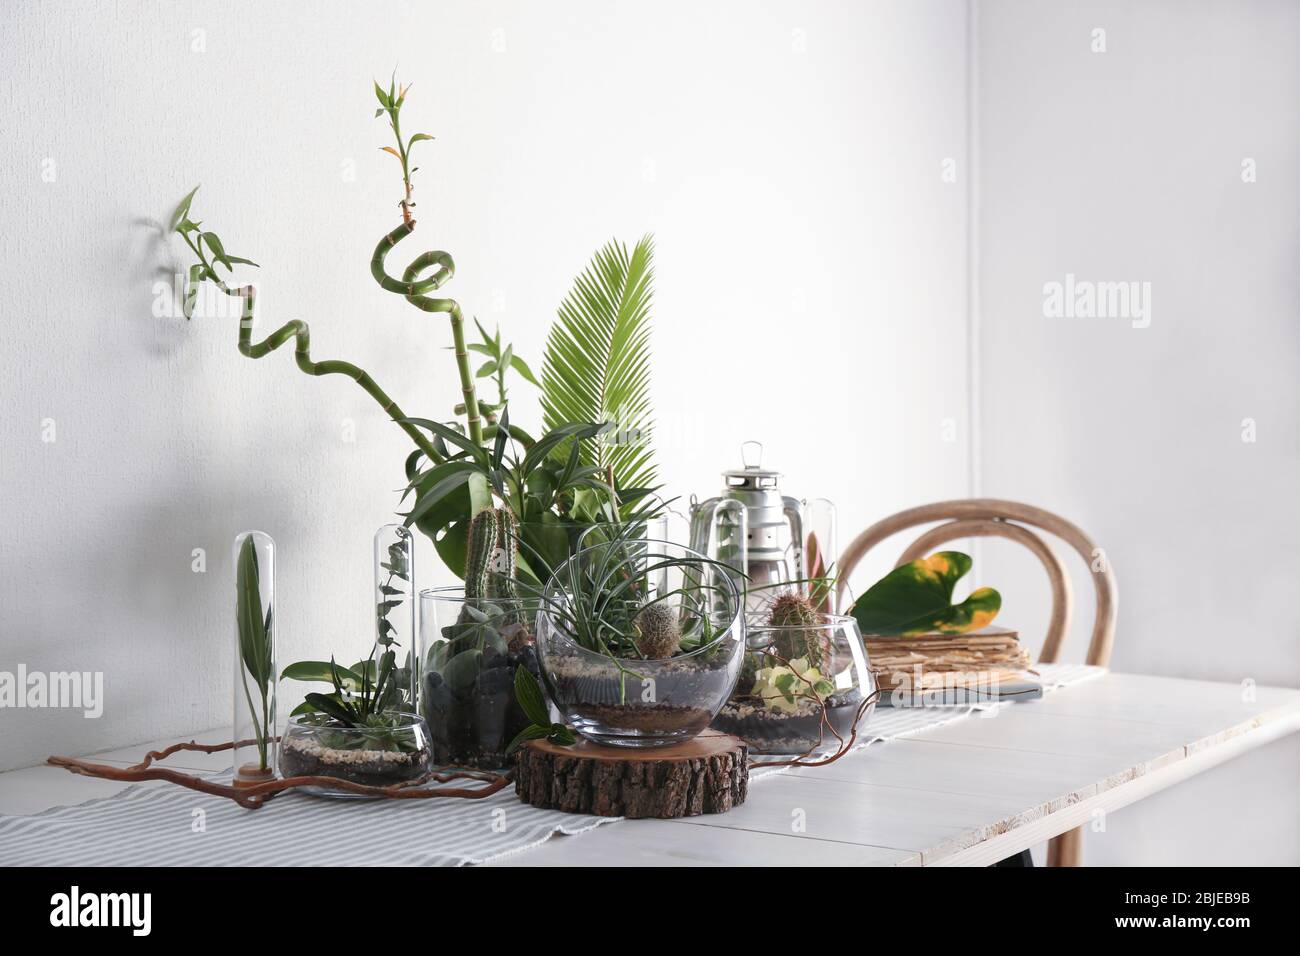 Succulent gardens in glass vases on table Stock Photo